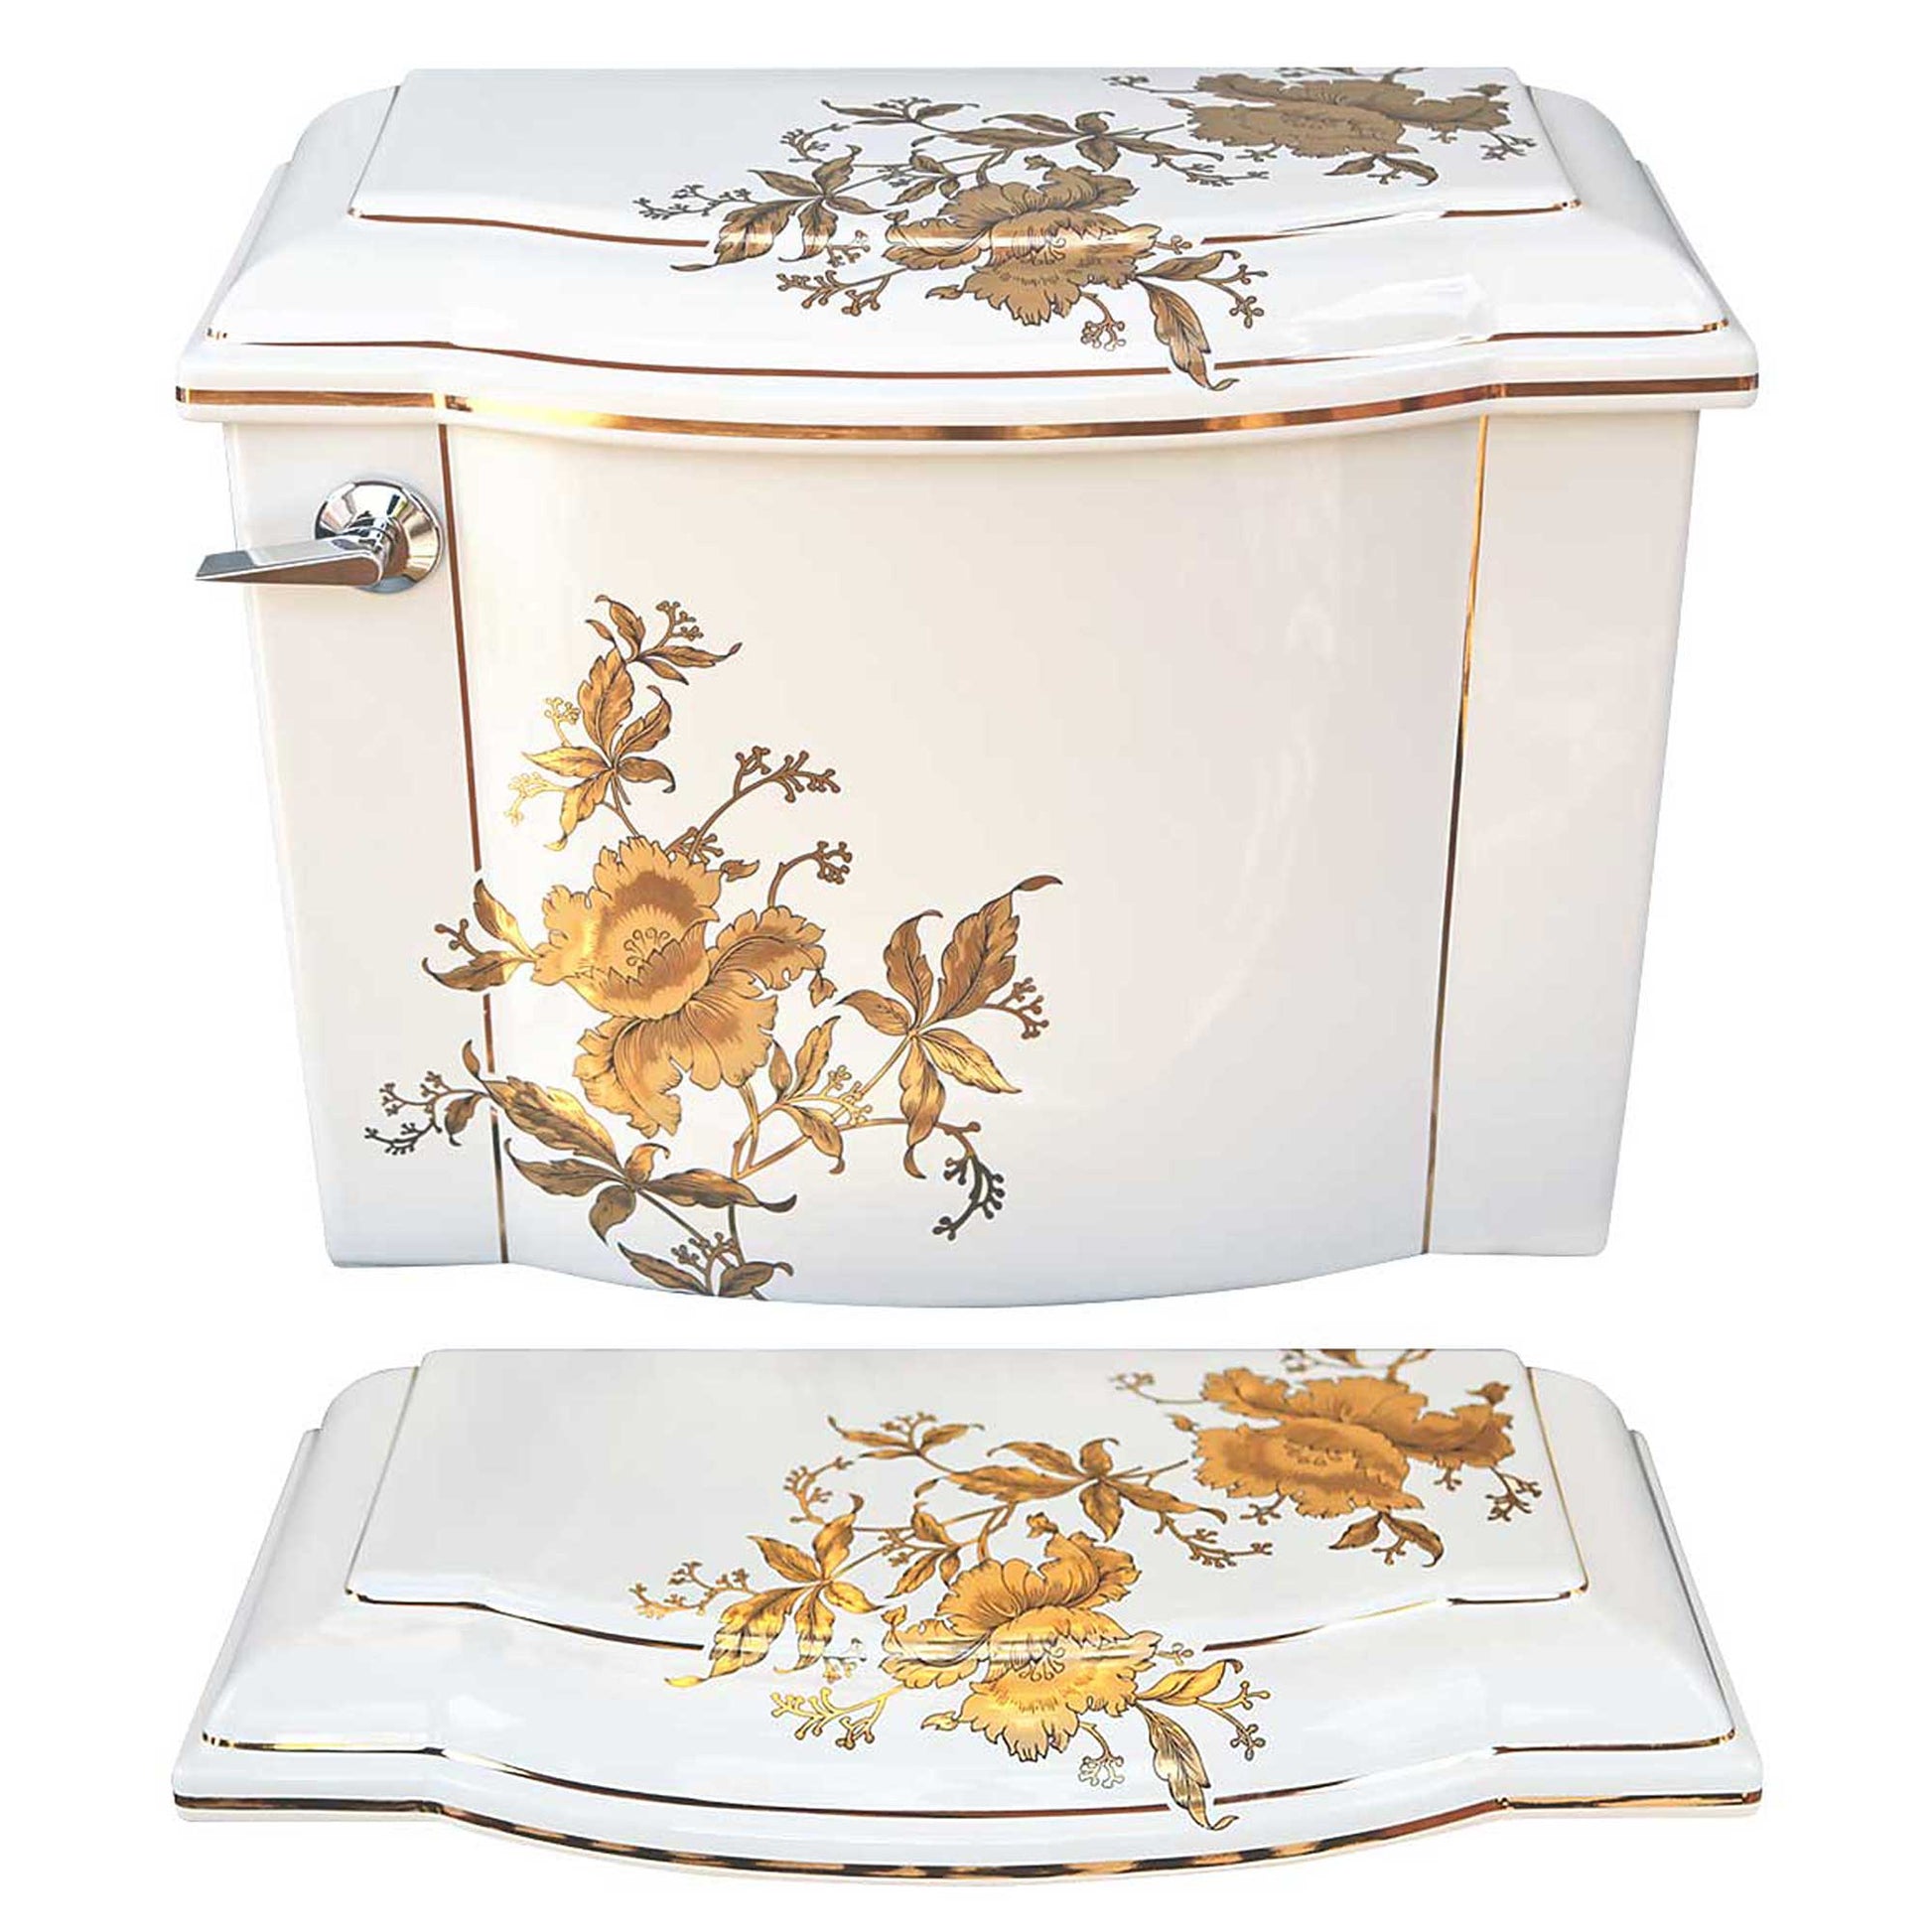 White Kohler toilet painted with beautiful design of gold bands and orchids